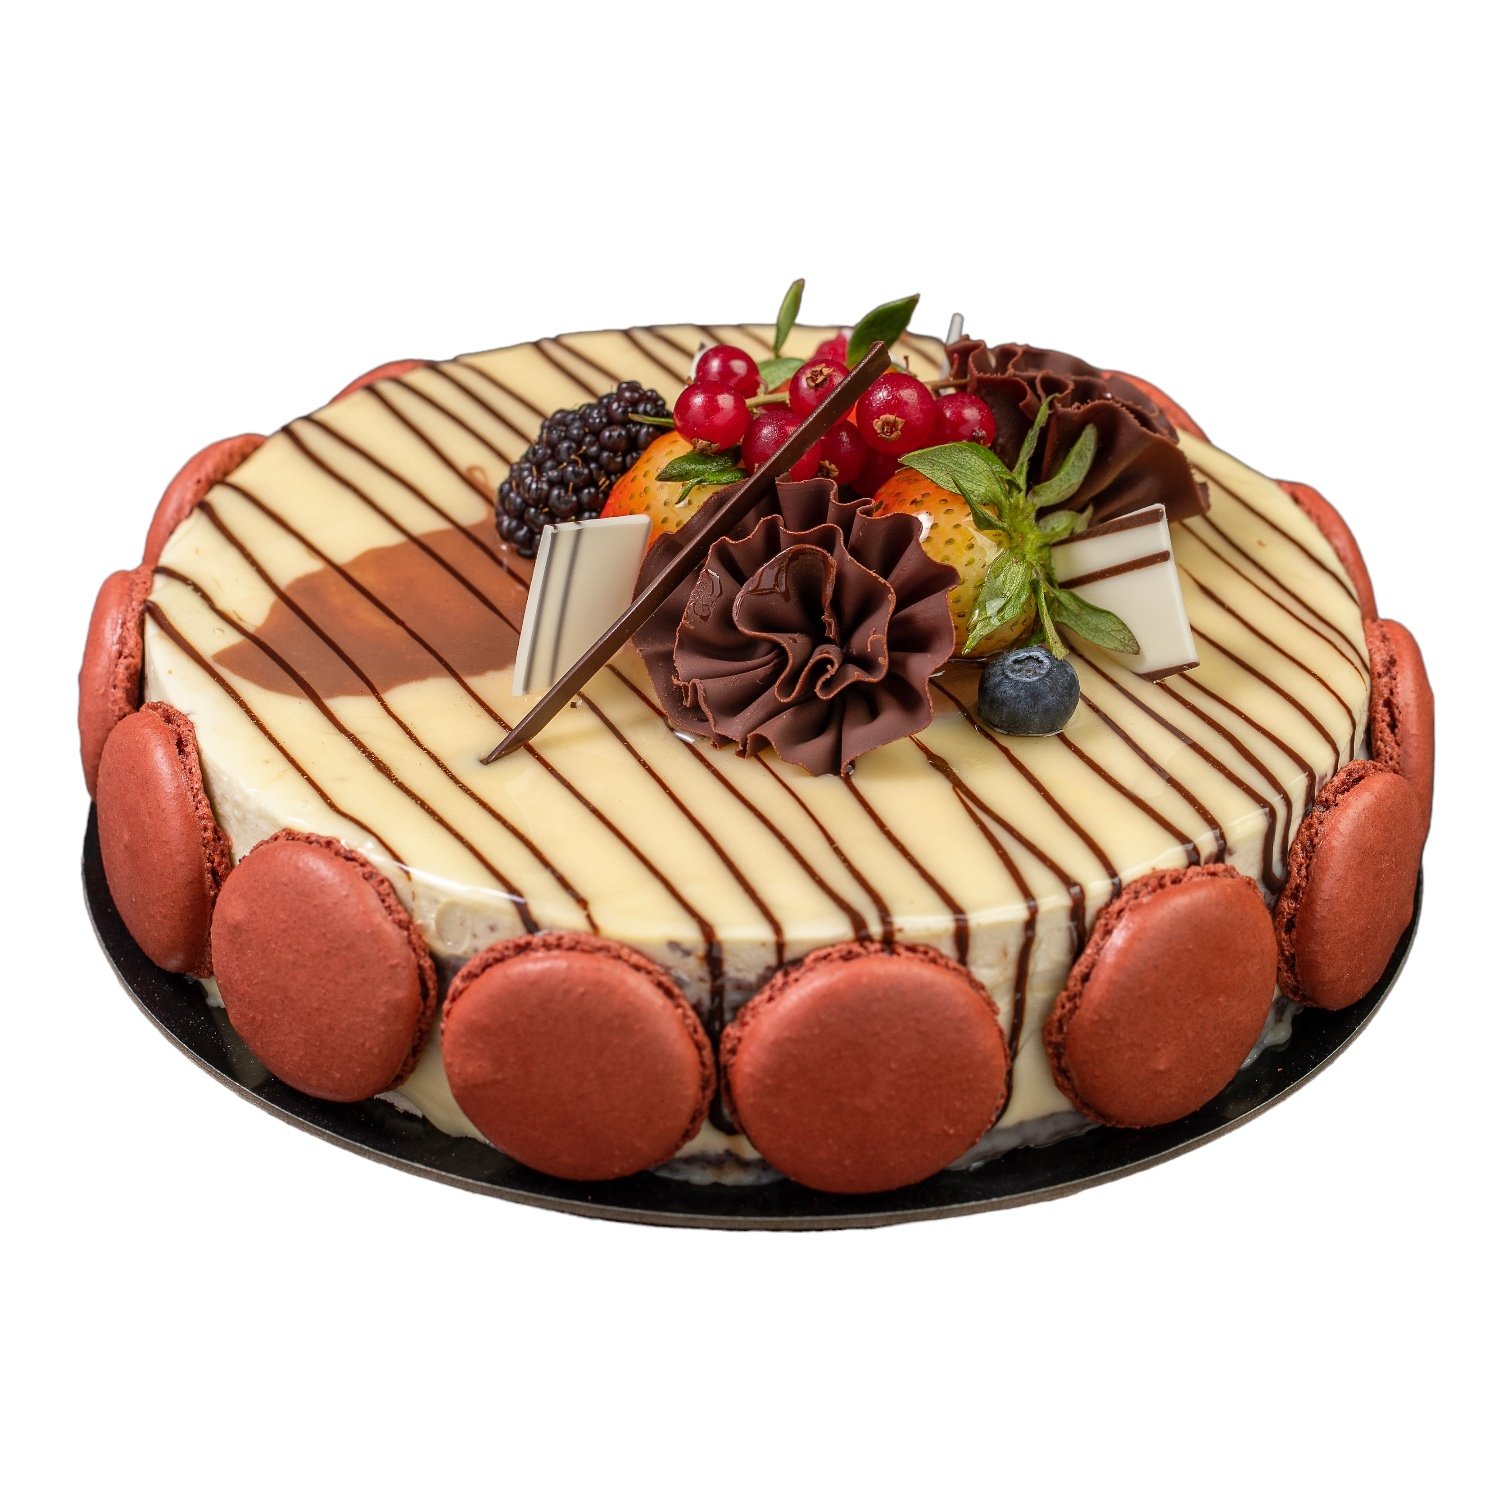 Mommy the Best Chef Cake | Online Cake Delivery KL/PJ Malaysia